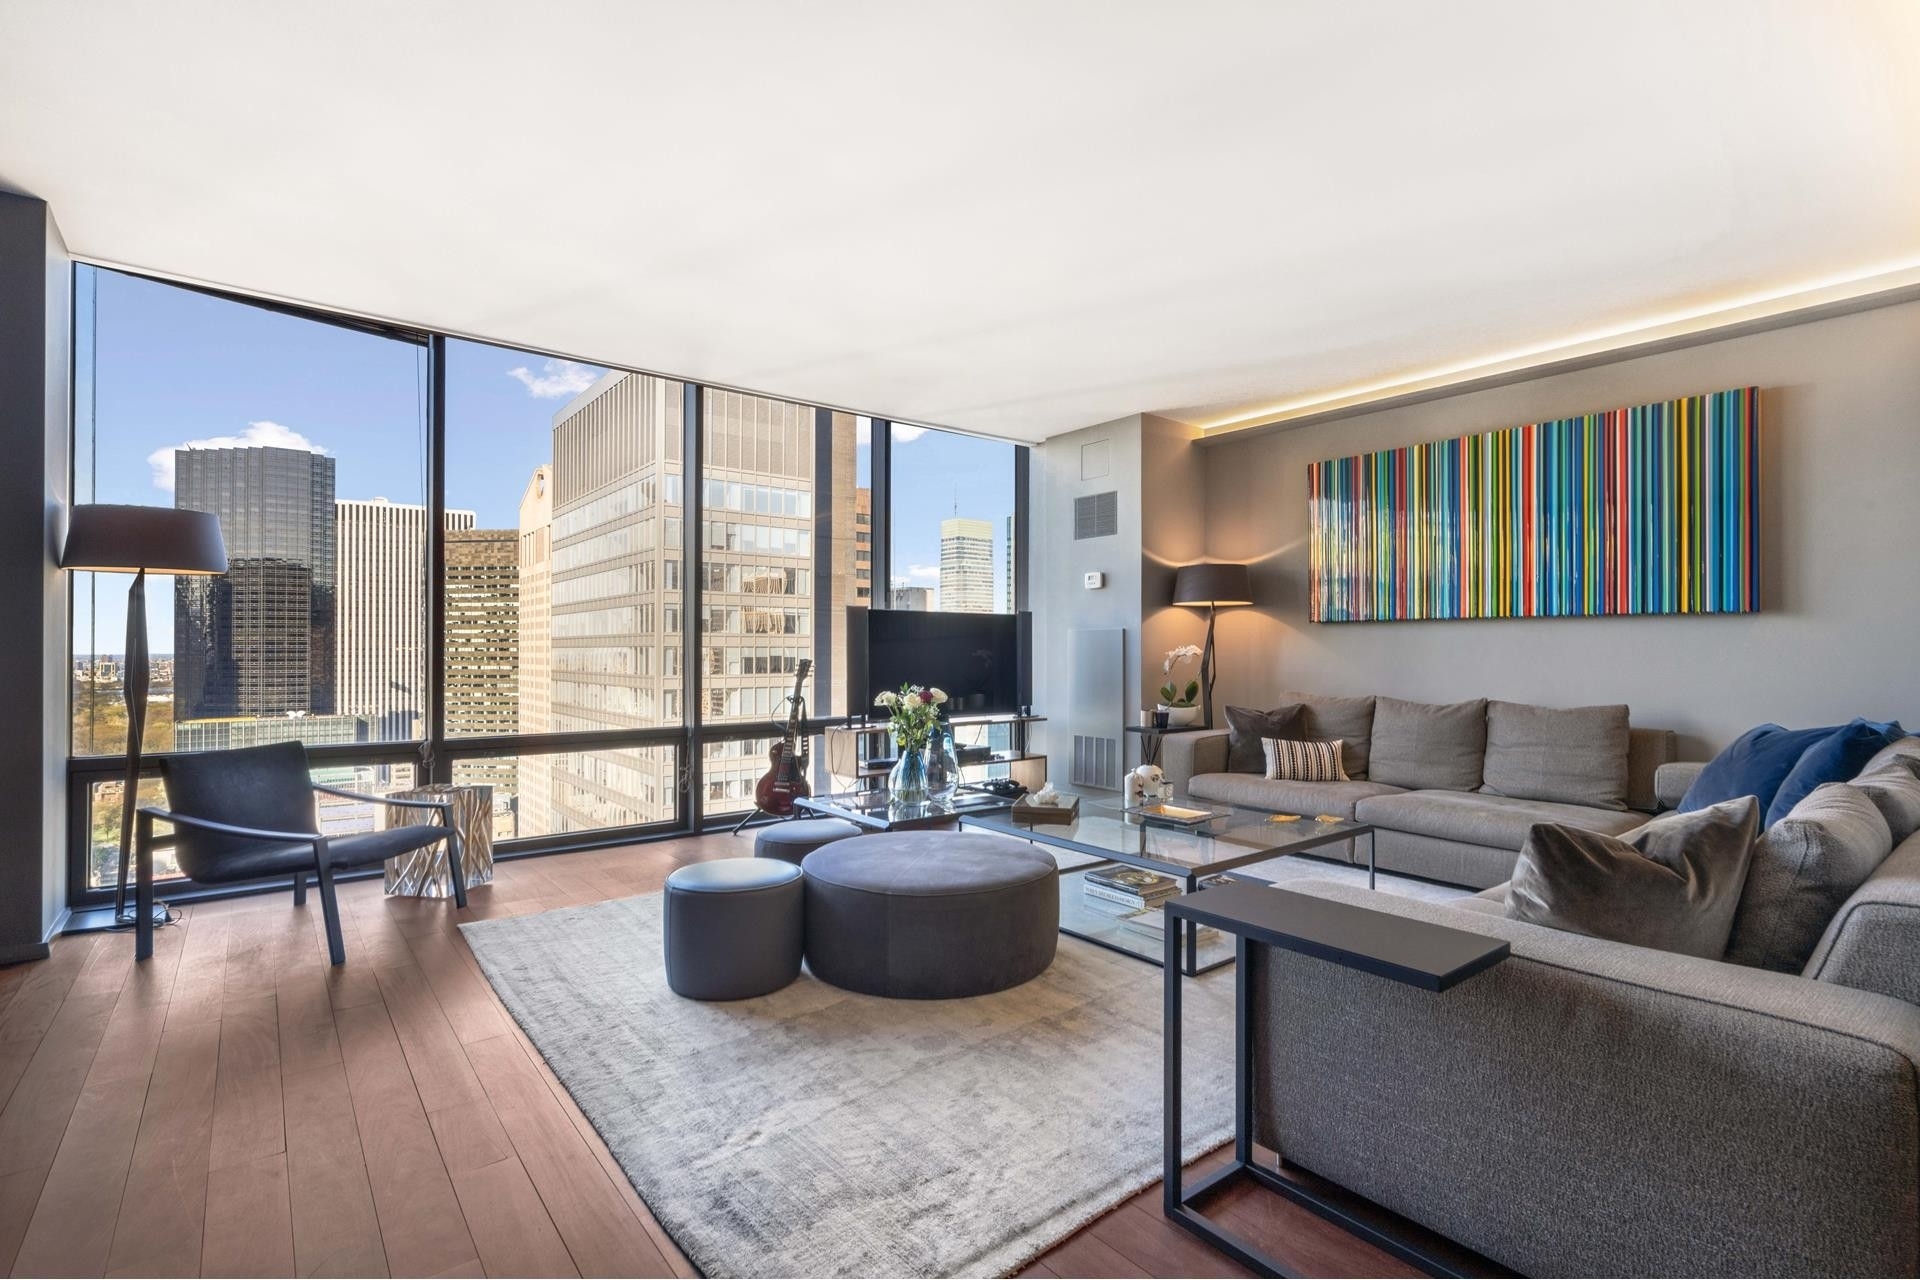 Condominium for Sale at Olympic Tower, 641 FIFTH AVE, 34B Turtle Bay, New York, NY 10022